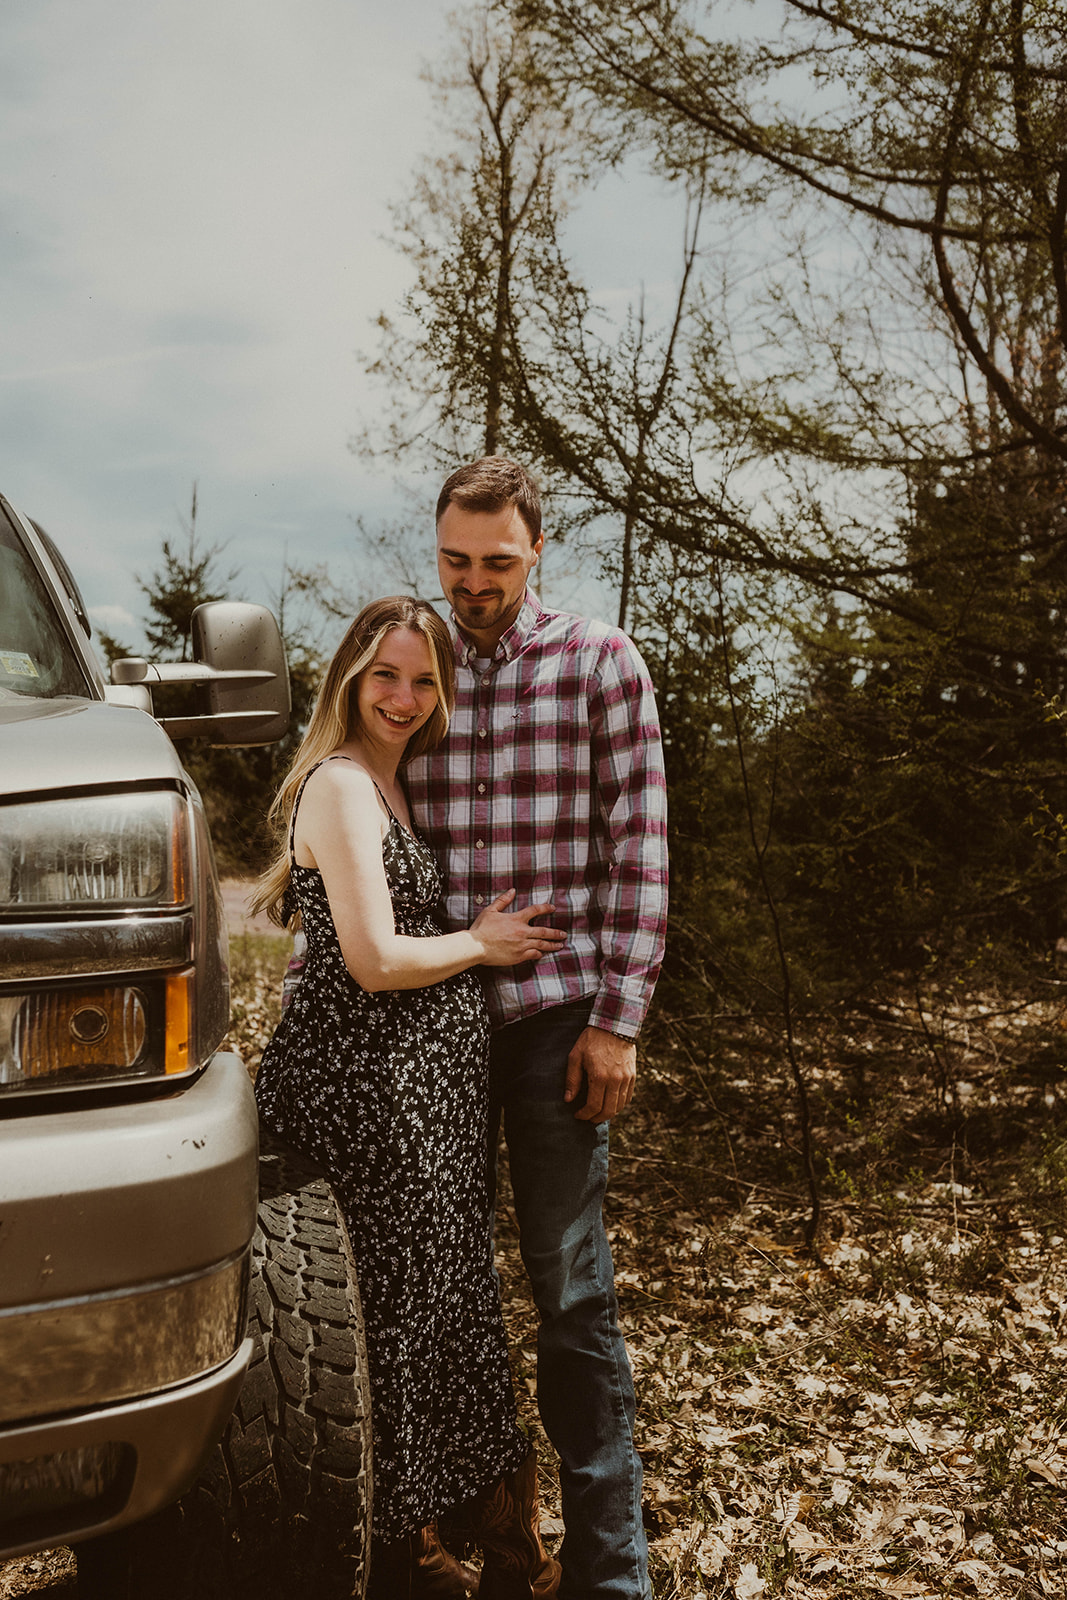 Future parents pose leaning together against their truck during their dreamy upstate New York maternity photos 